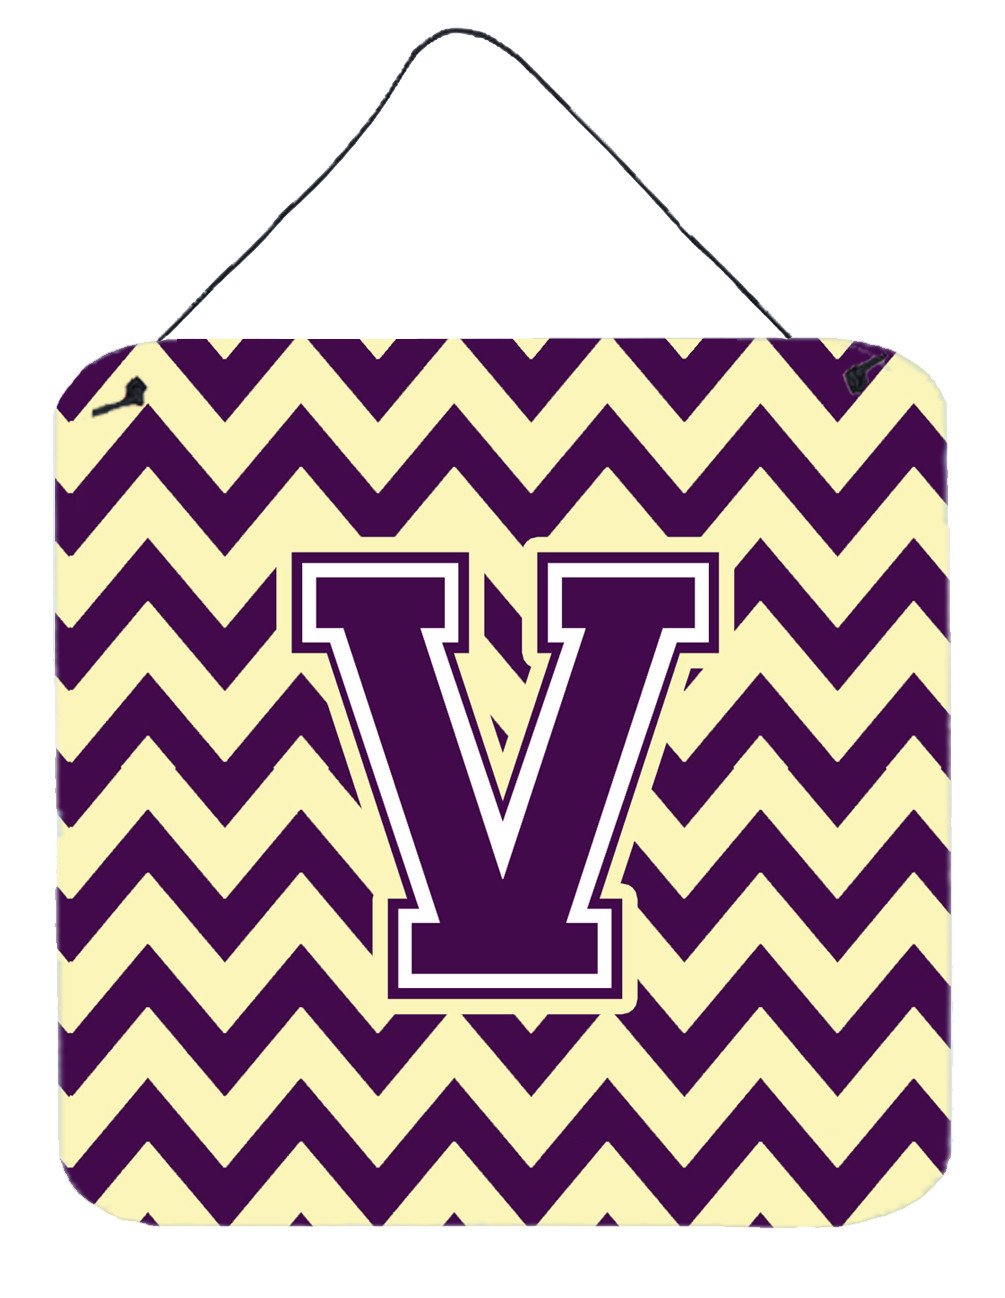 Letter V Chevron Purple and Gold Wall or Door Hanging Prints CJ1058-VDS66 by Caroline's Treasures